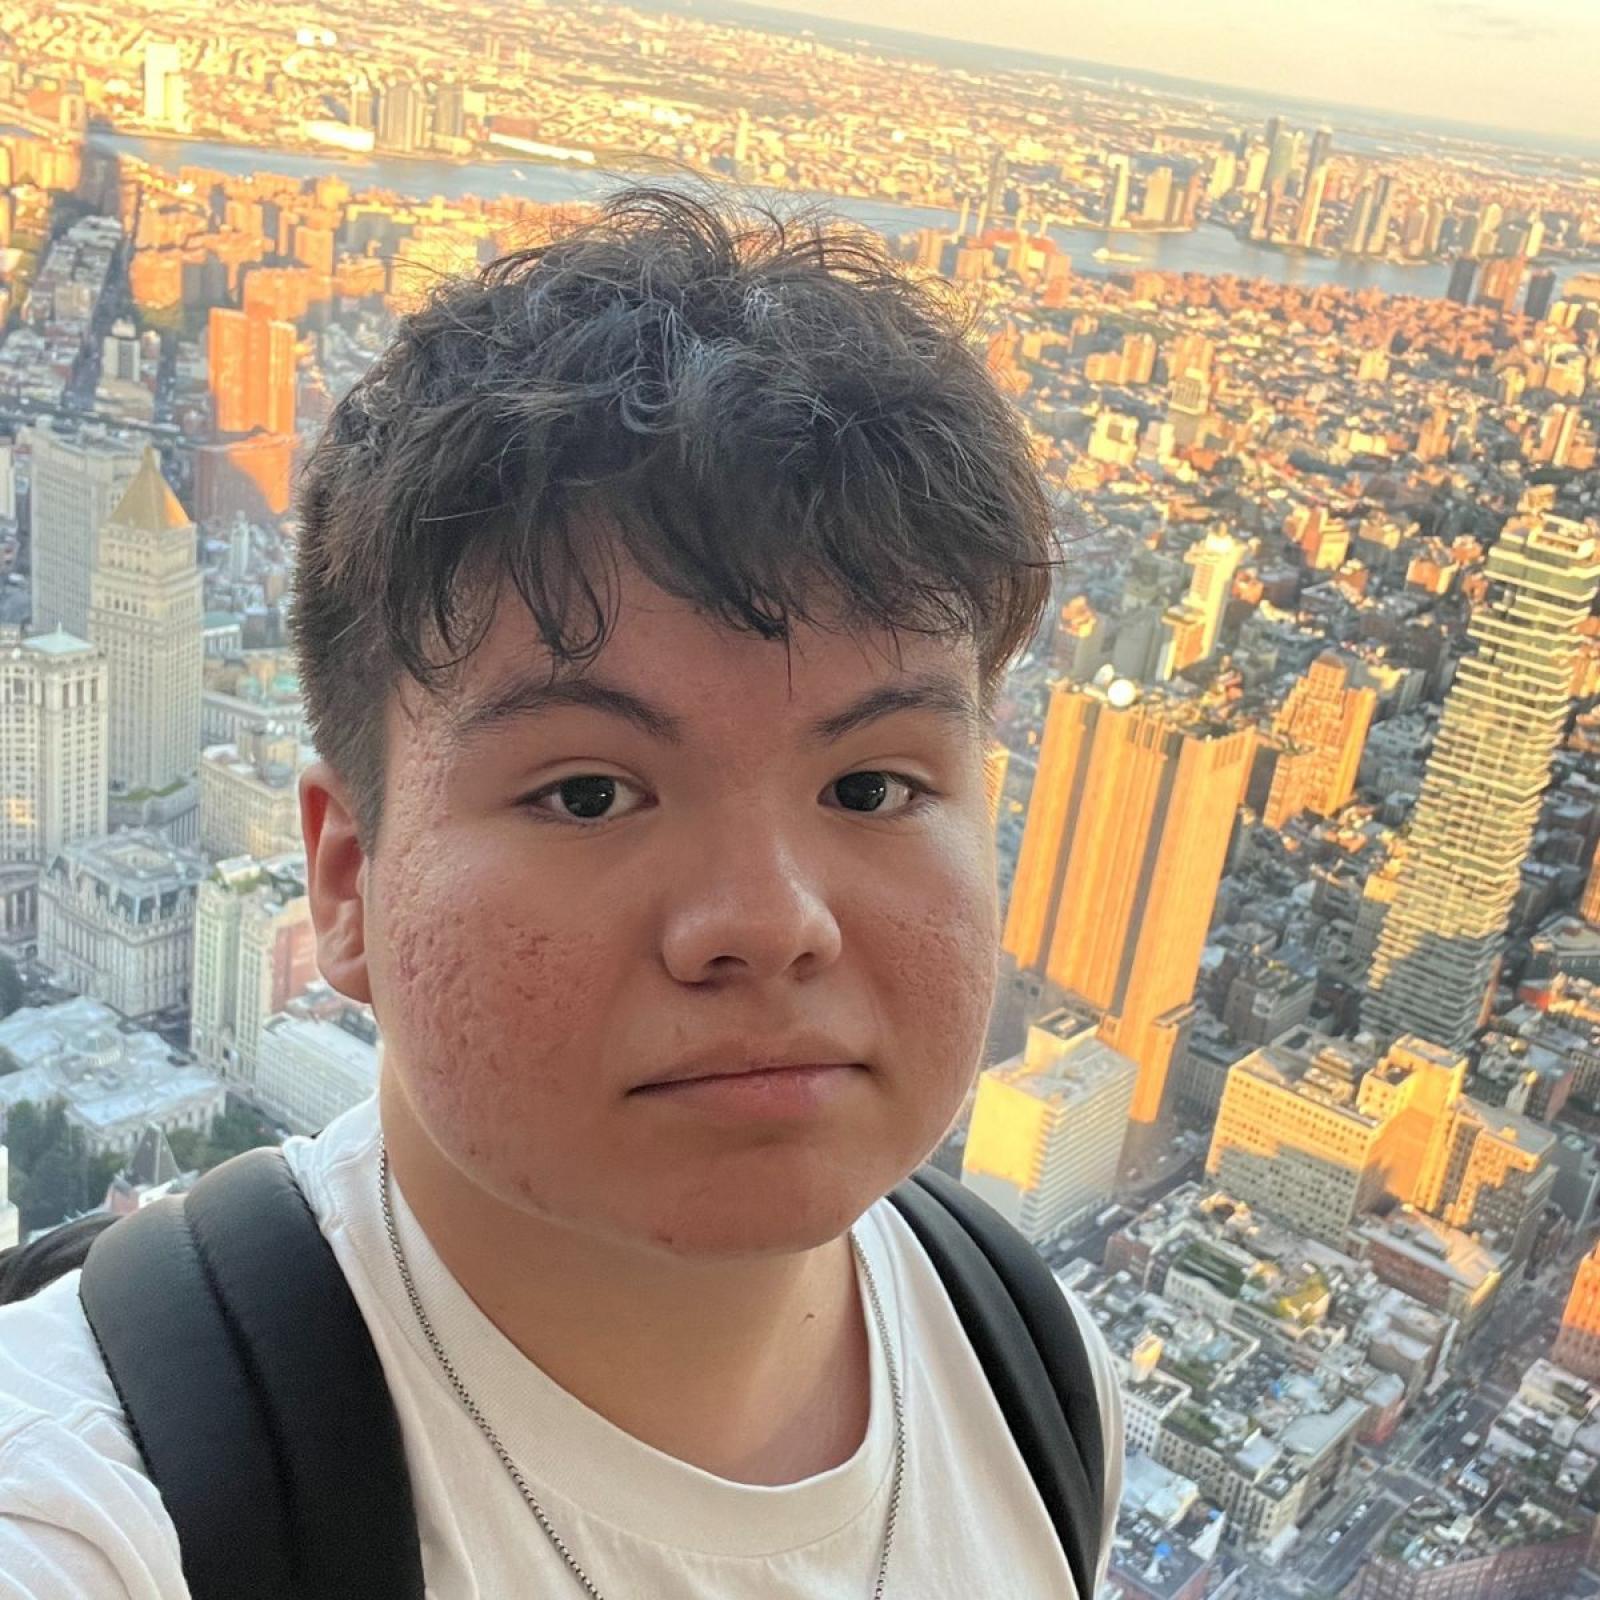  student Daniel Ramos taking a selfie while overlooking the NYC skyline at sunset.